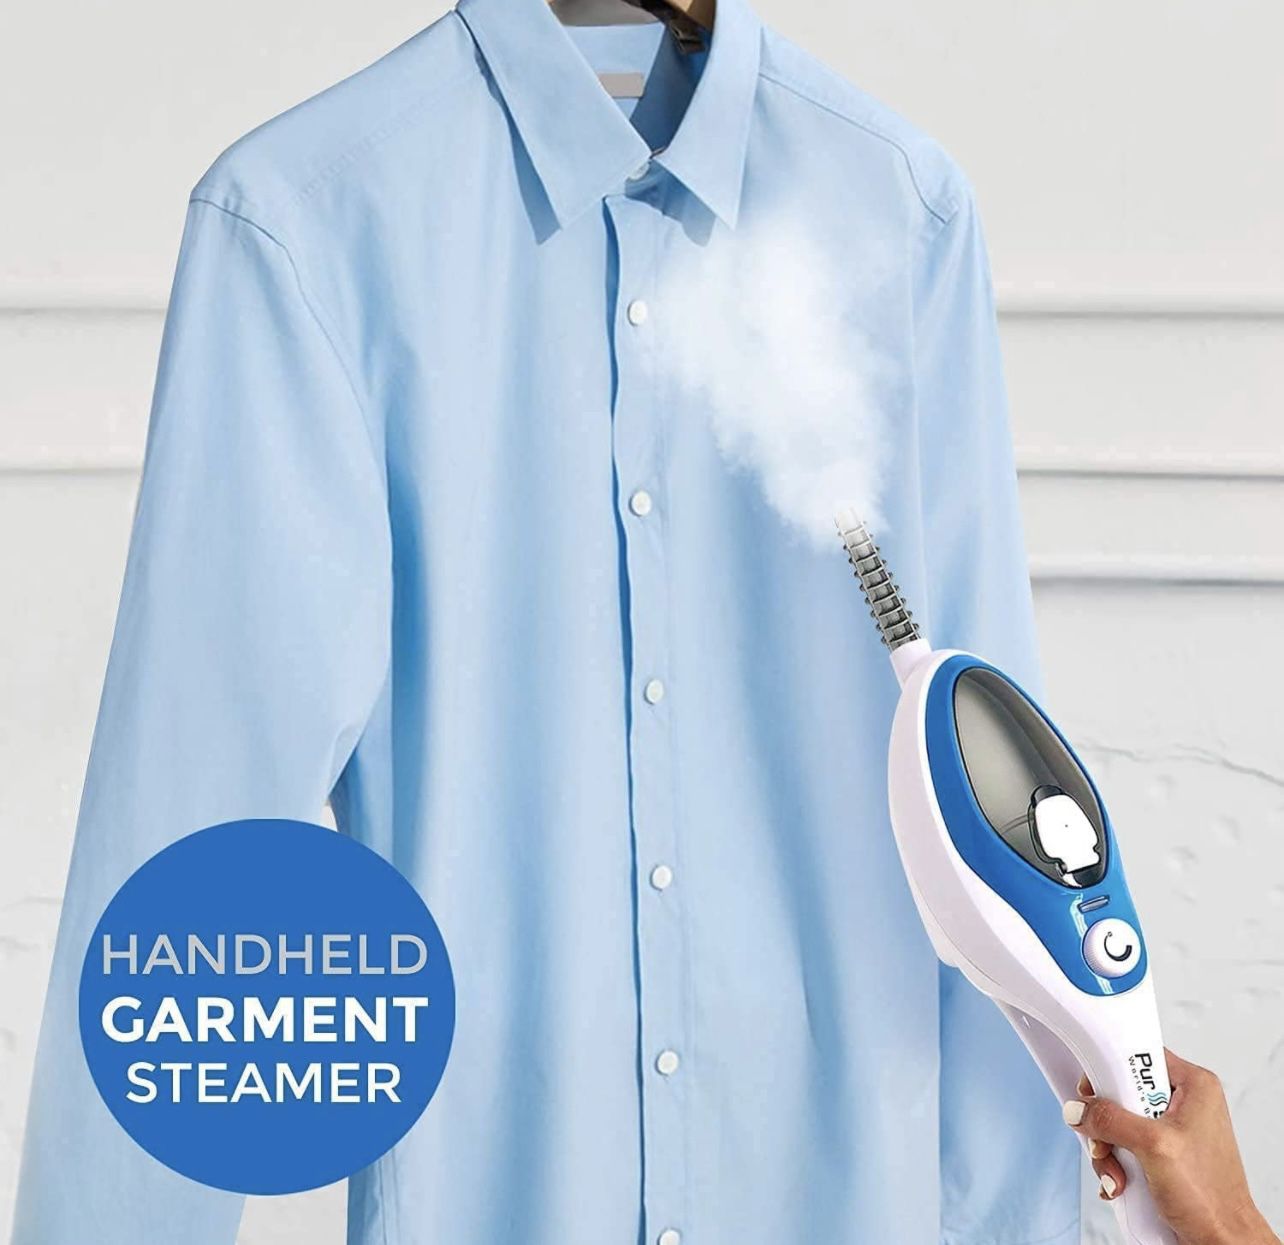 New PurSteam Steam Mop Cleaner 10-in-1 with Convenient Detachable Handheld Unit